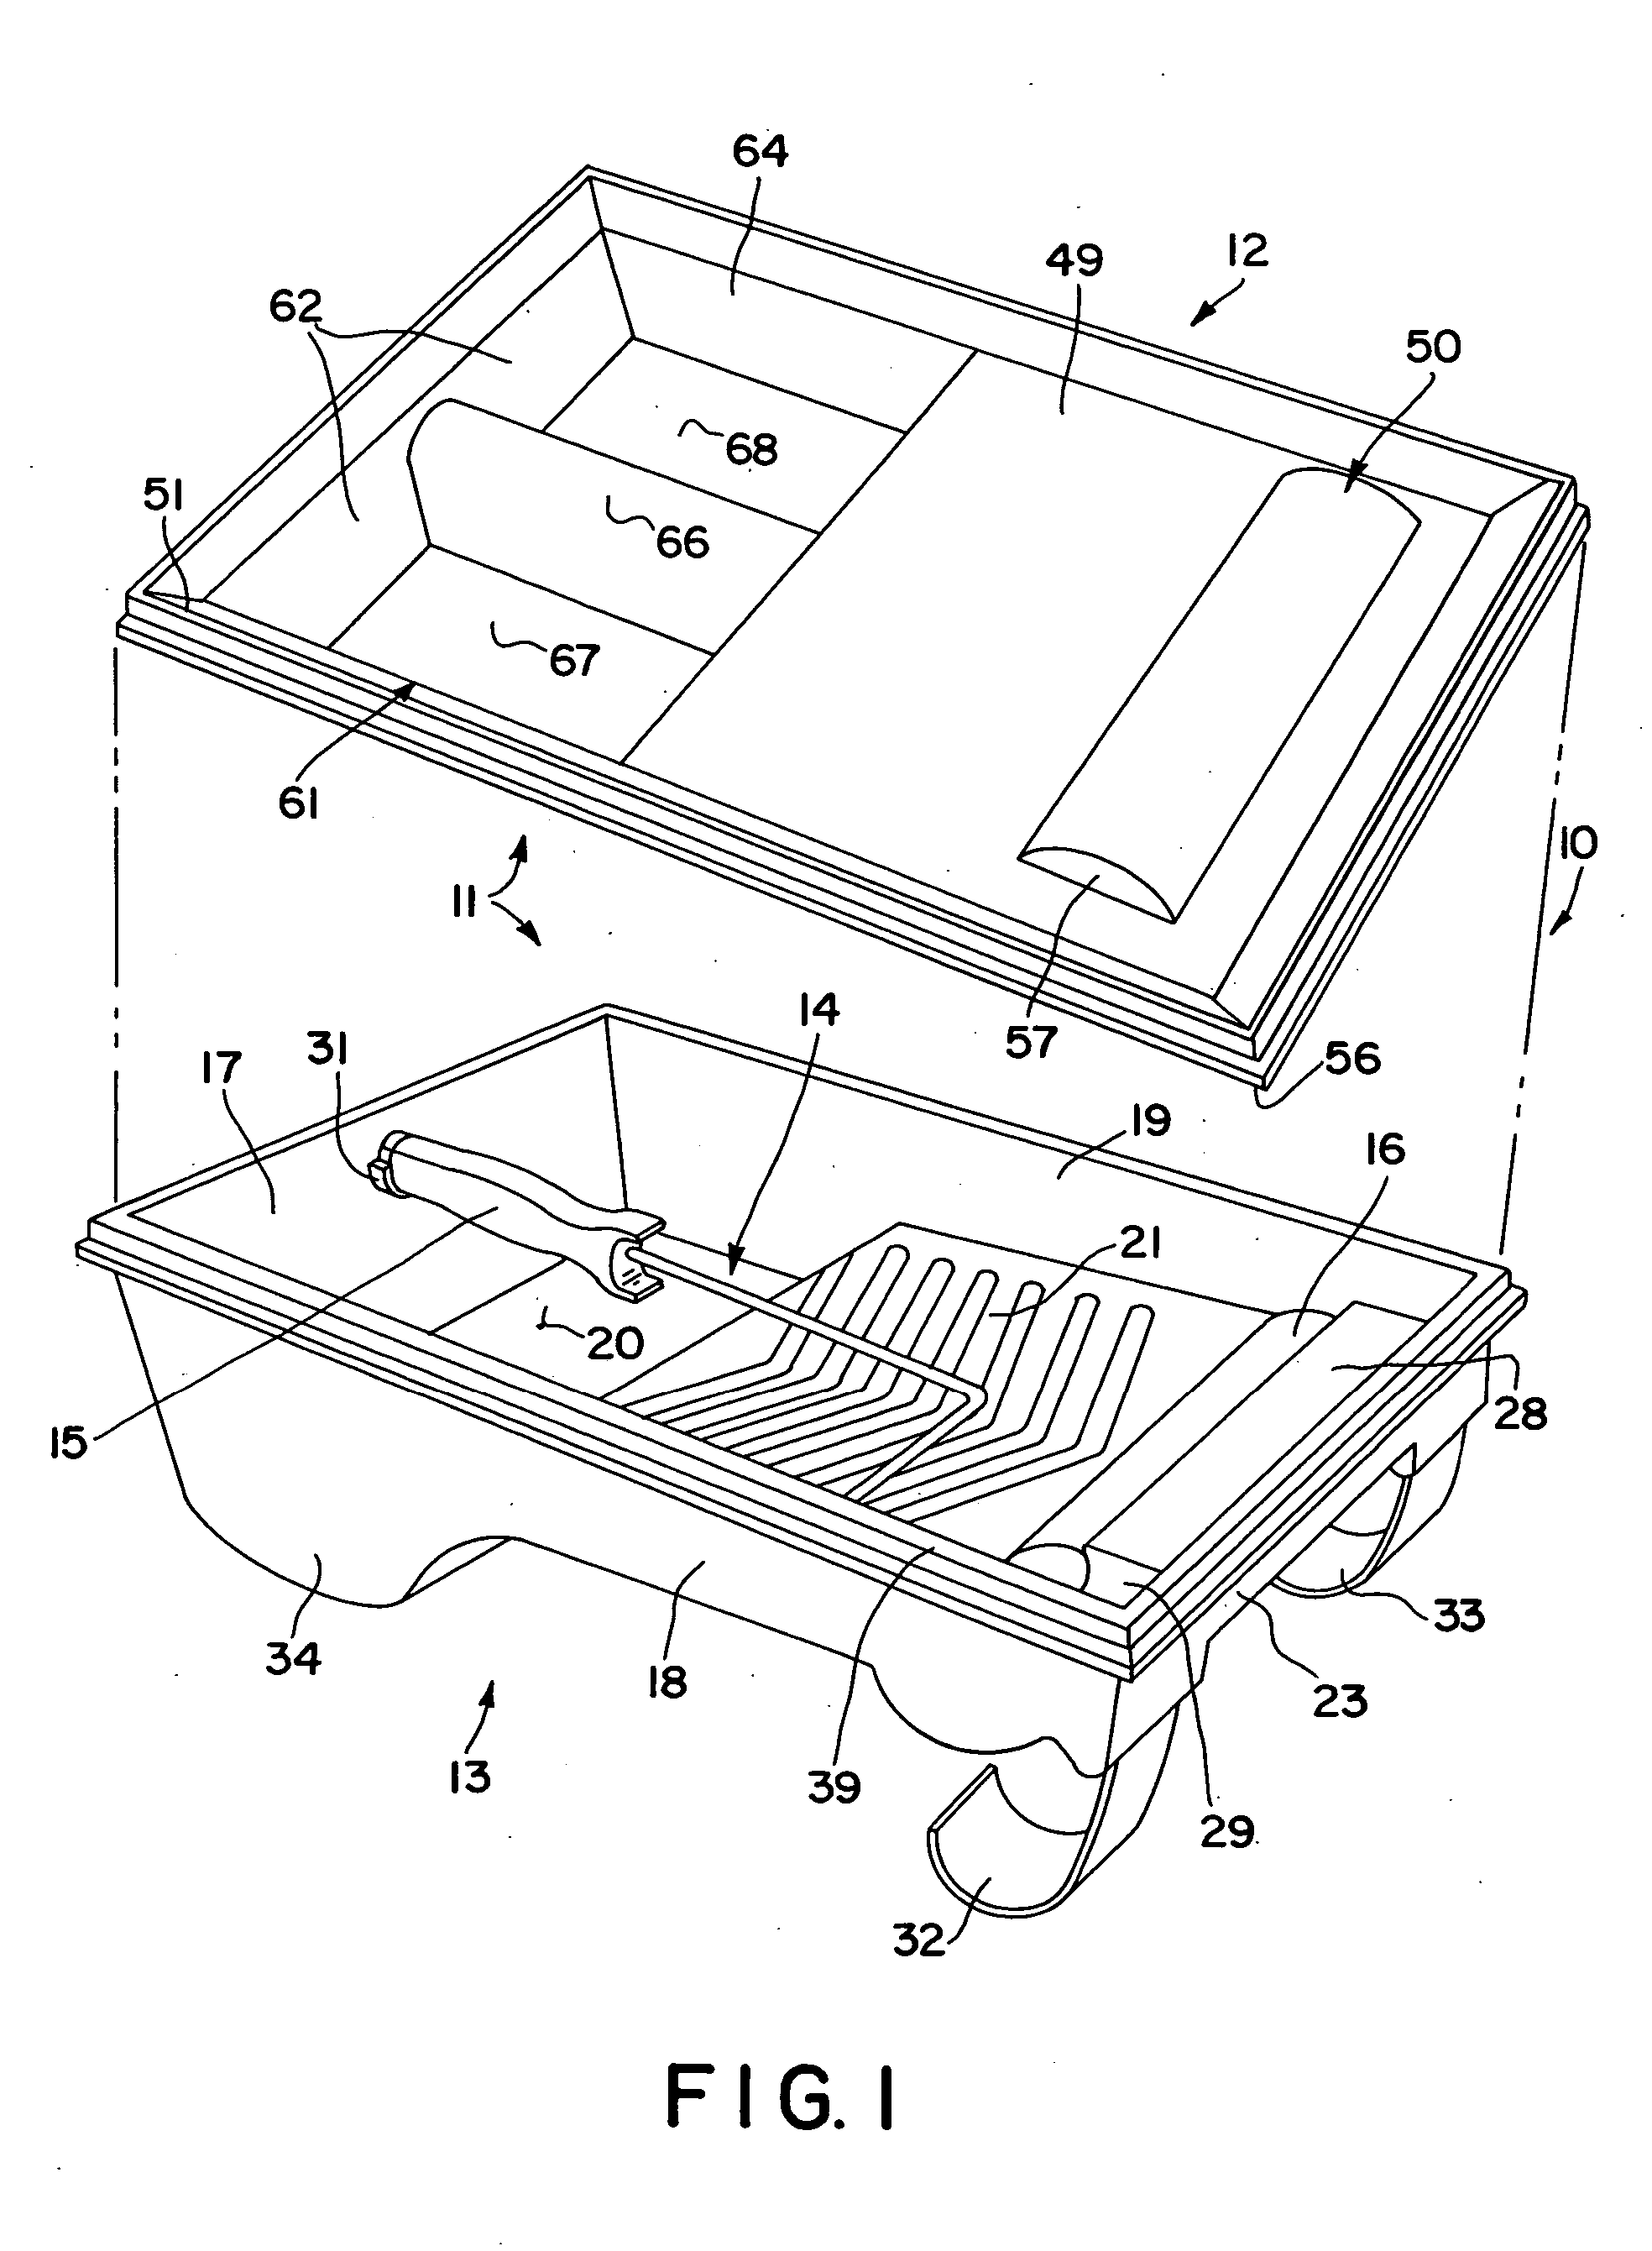 Sealable paint tray assembly